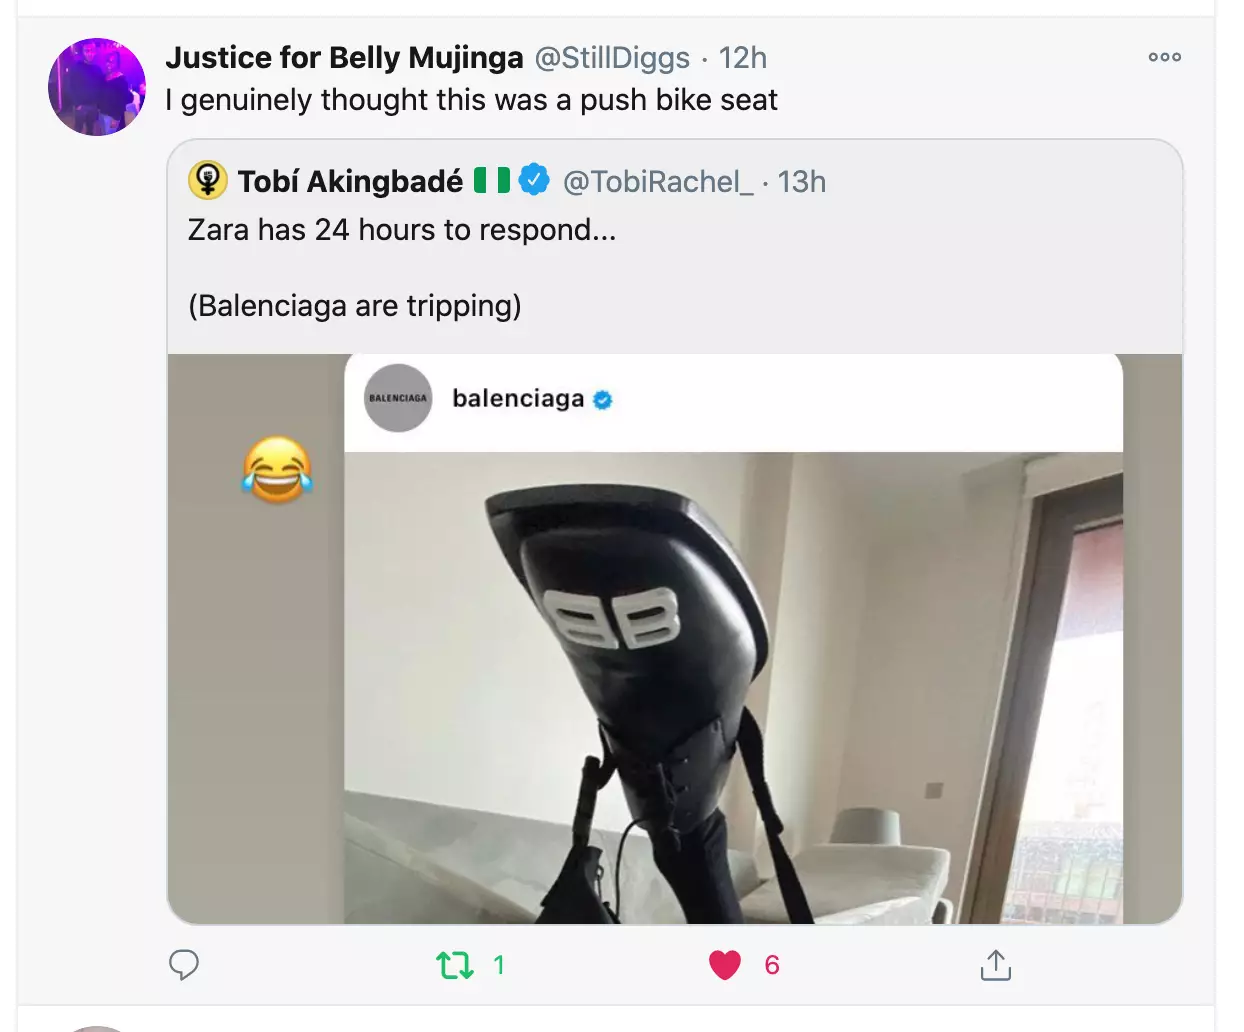 One user thought the image was of a push bike seat (